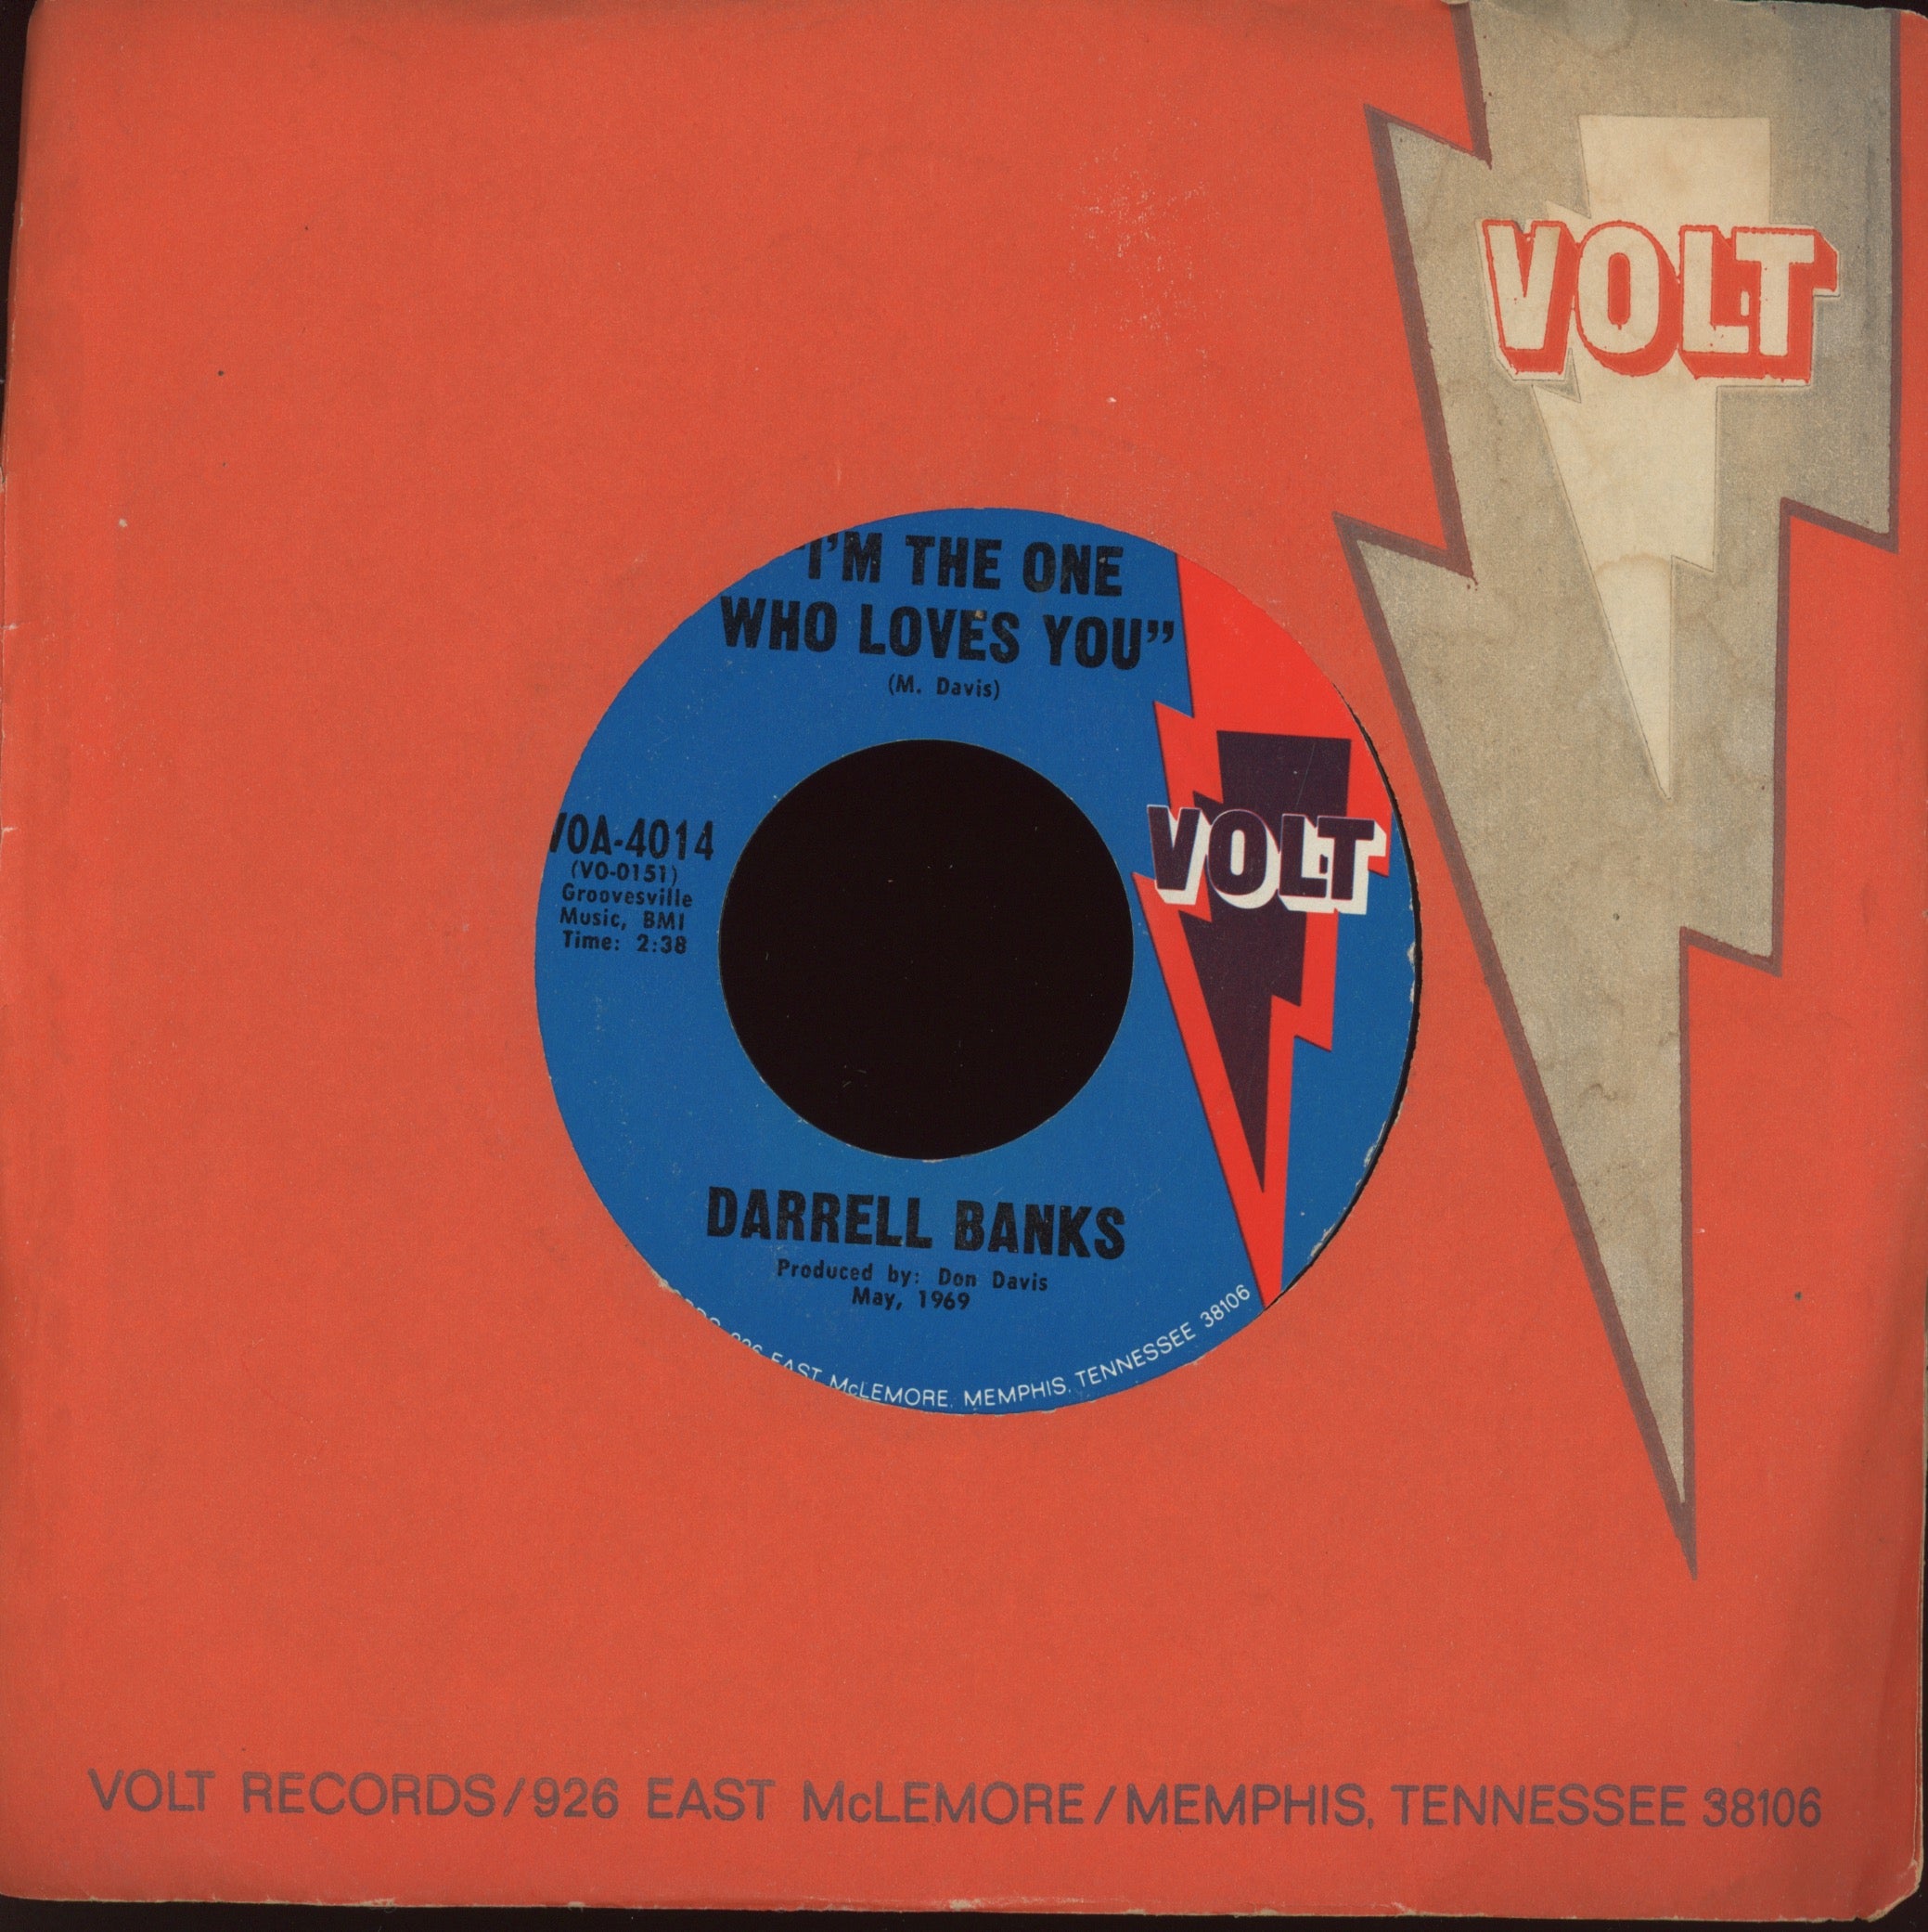 Darrell Banks - I'm the One Who Loves You on Volt Northern Soul 45